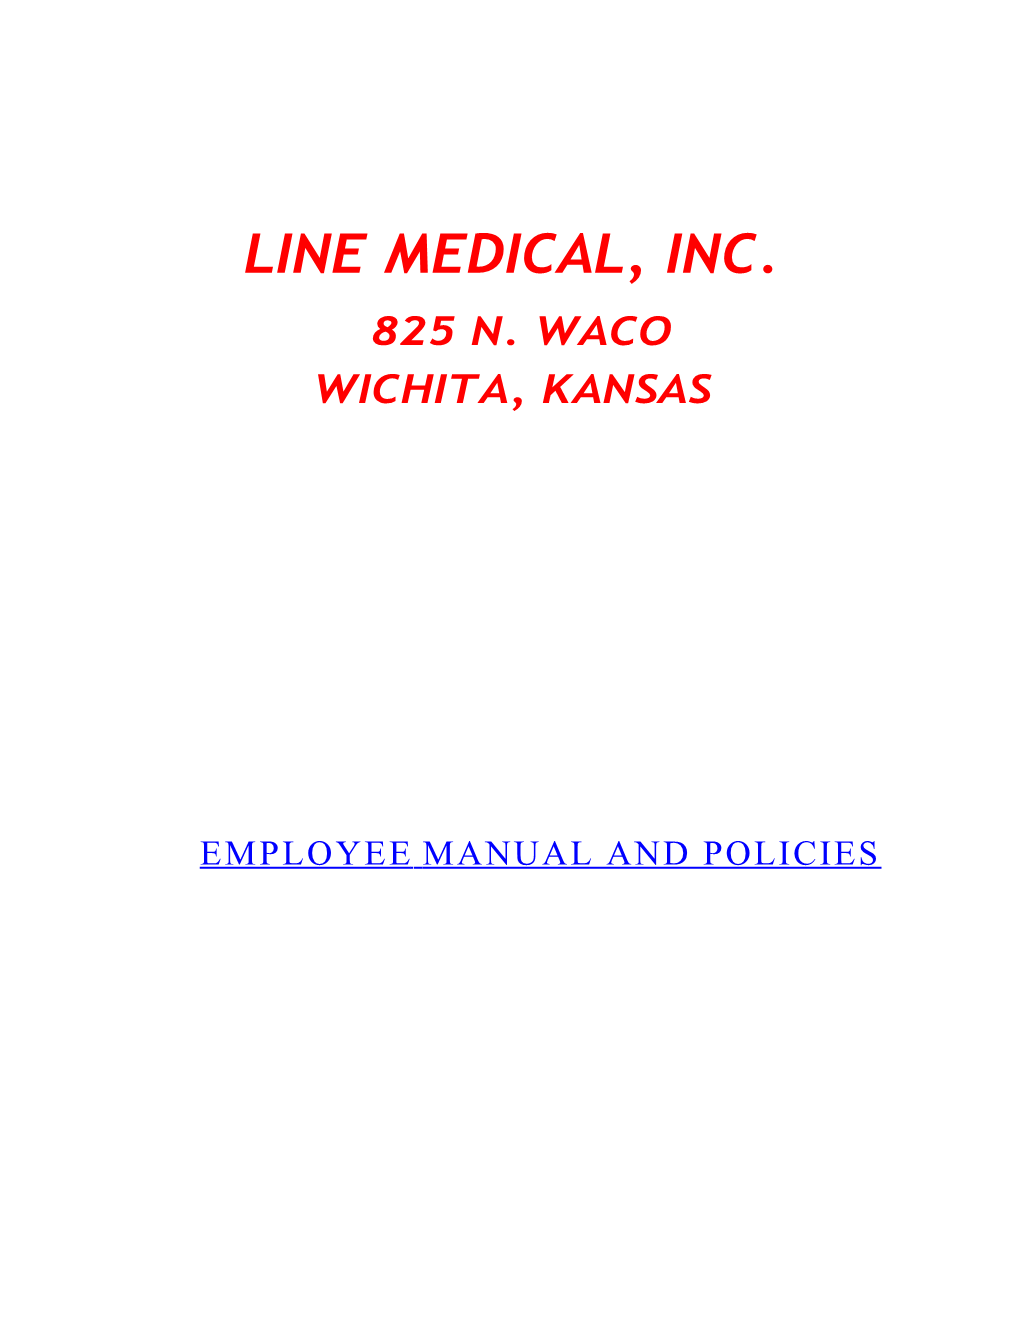 Employee Manual and Policies